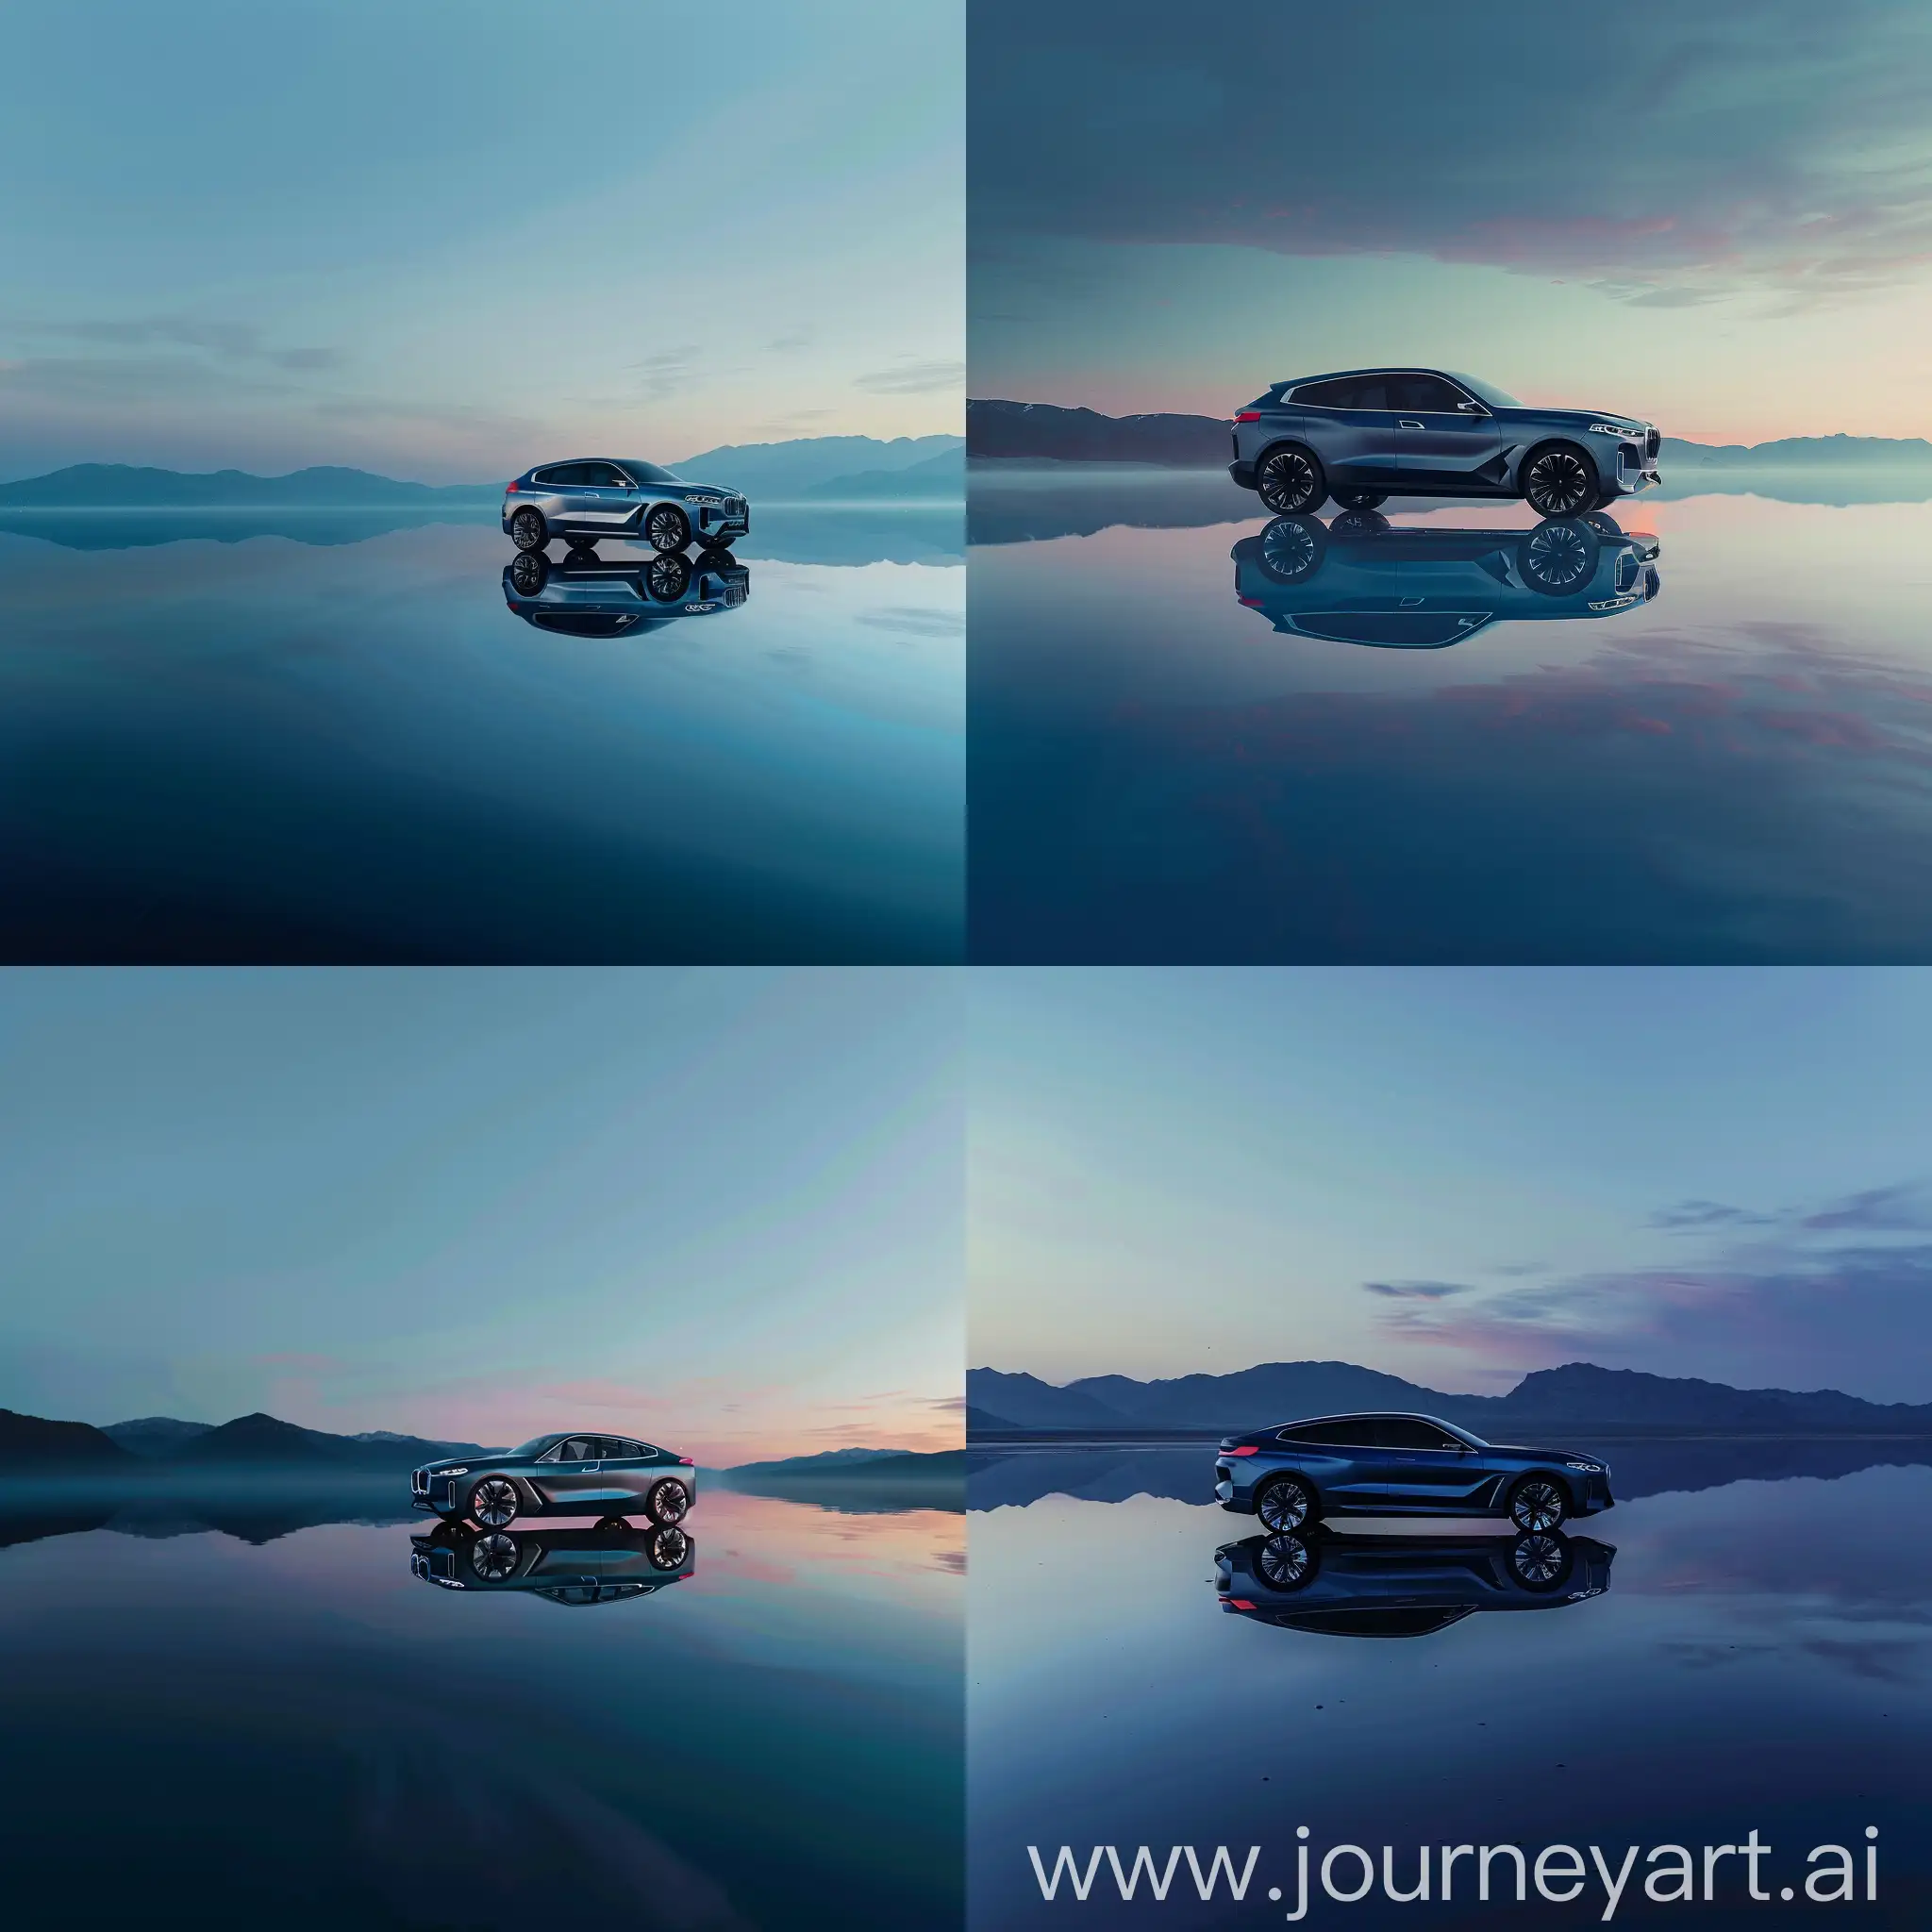 BMW x8 car that reflects the twilight’s soft light, The calm waters create a mirror-like reflection of the car,  Distant mountains add a sense of depth and tranquility, Sky: Soft hues of blue suggest it’s either dawn or dusk